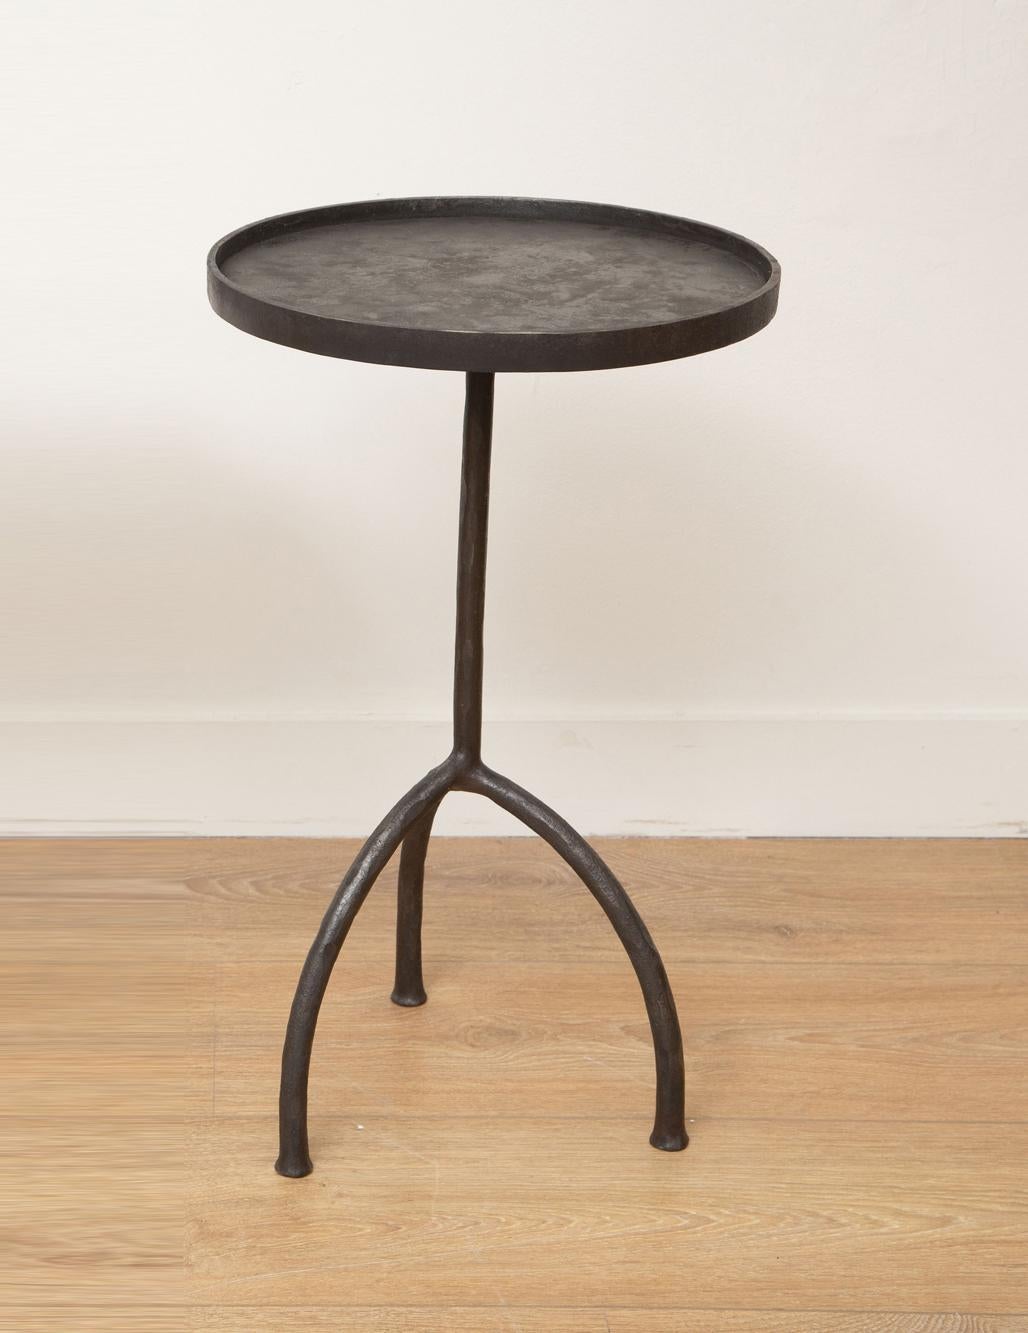 Single custom tripod hand-forged side or drinks table, in stock
Hand-forged iron legs, round top with lip
Dark bronze patina
Perfect for drinks, side, end tables
Can be sold individually
Ready to ship from our showroom in Miami.